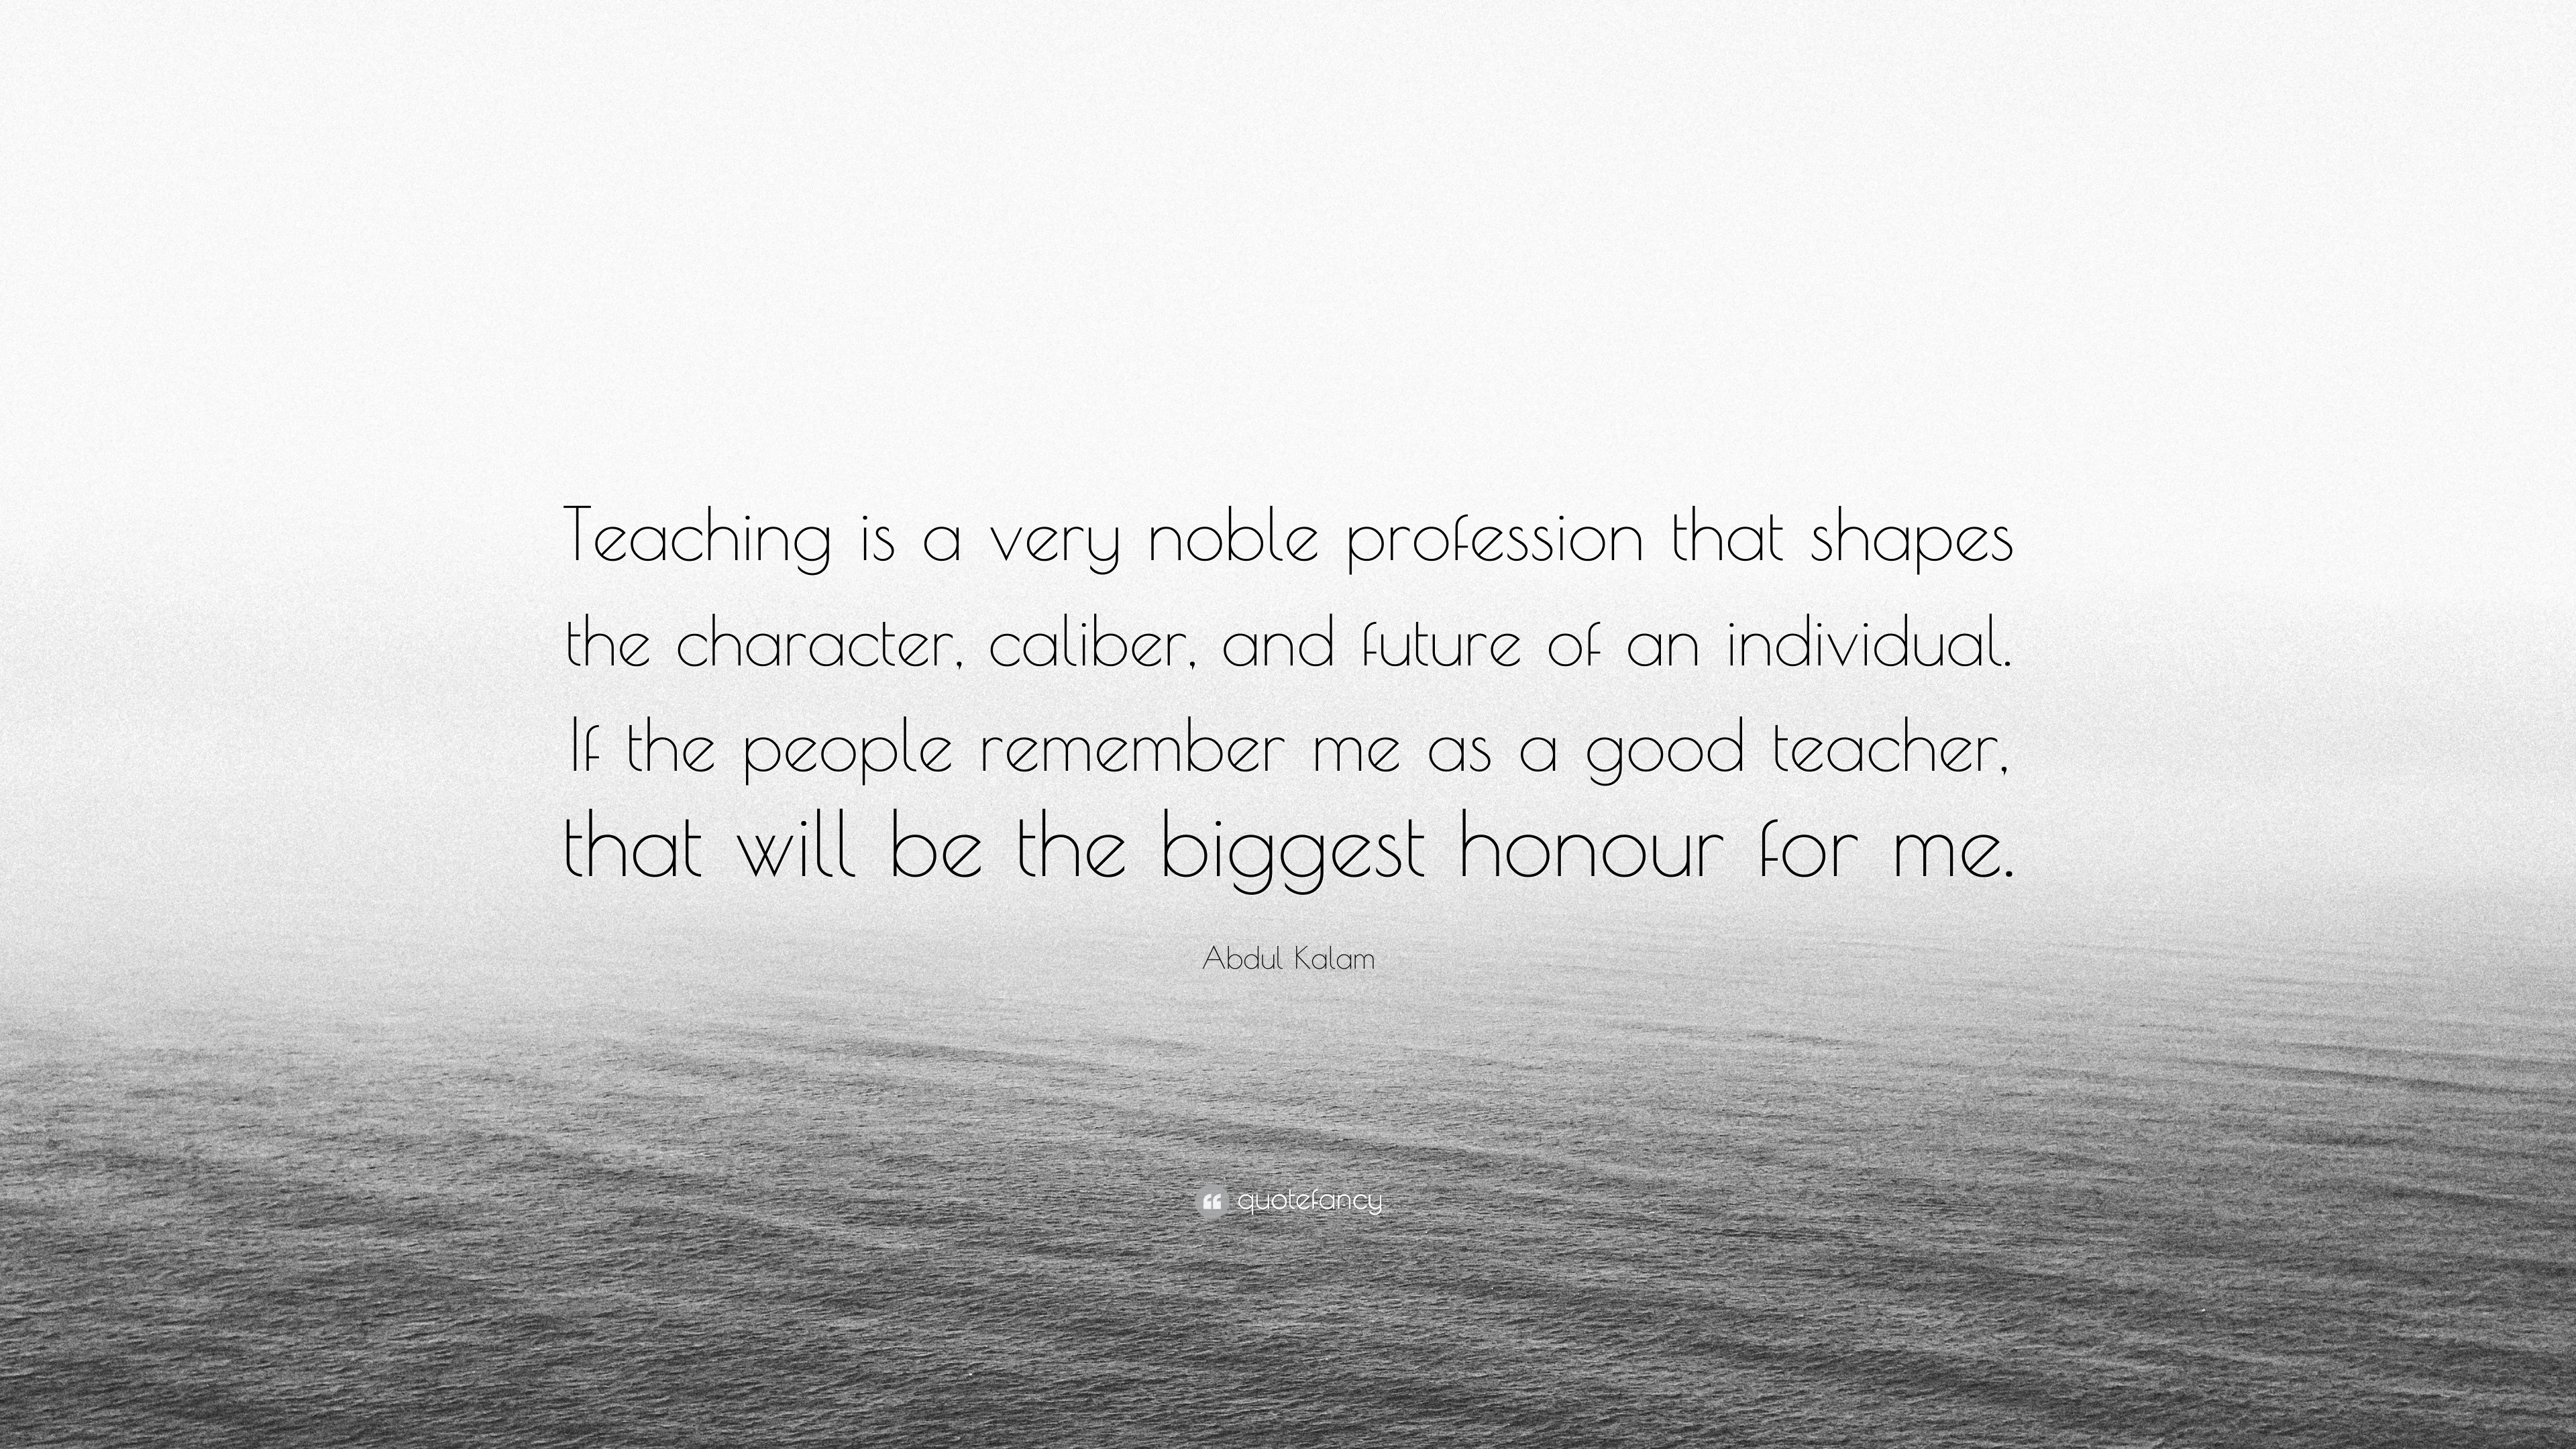 Abdul Kalam Quote: “Teaching is a very noble profession that shapes the